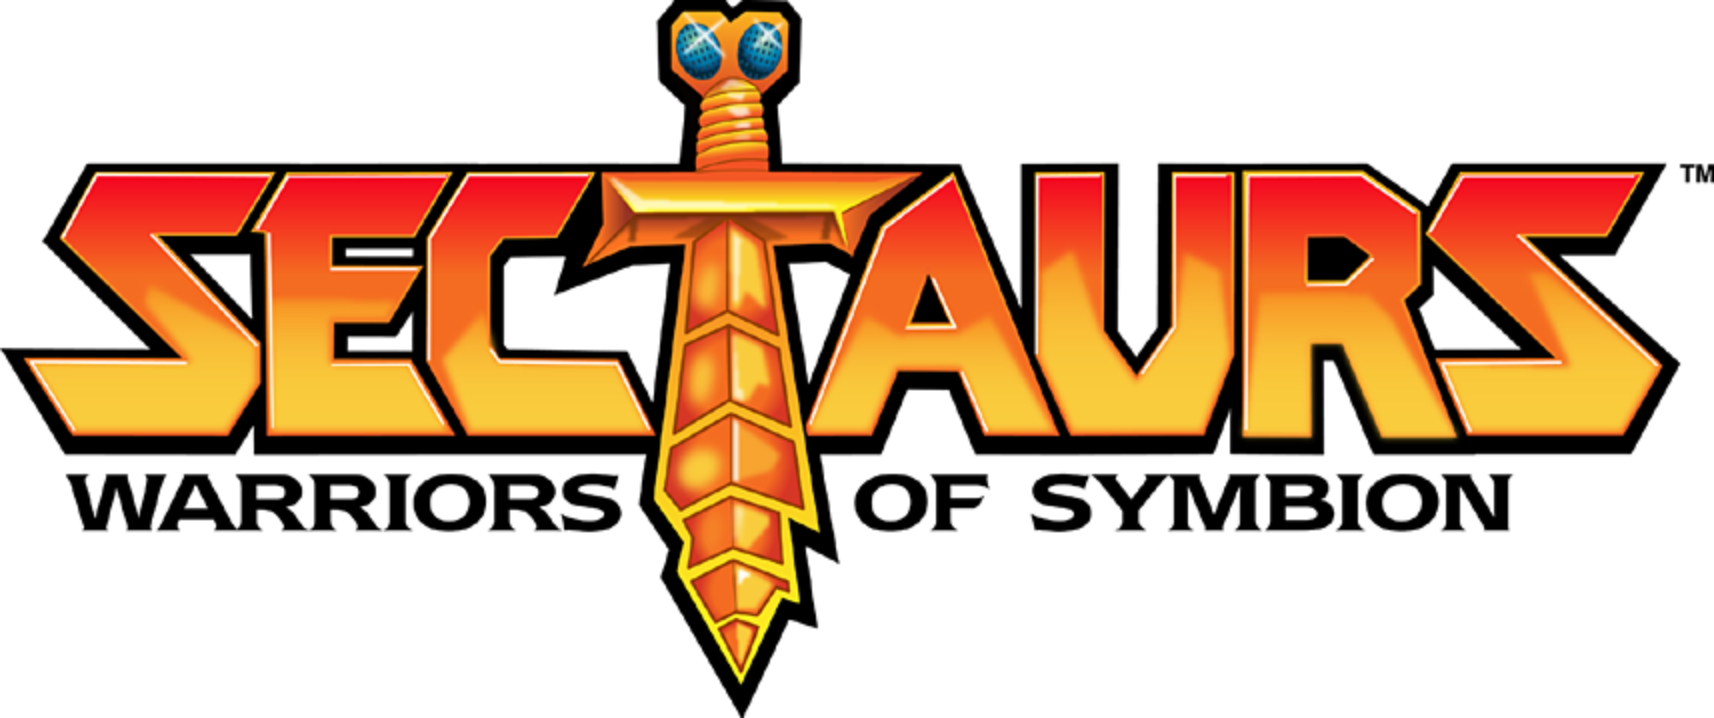 Sectaurs Complete (1 DVD Box Set)